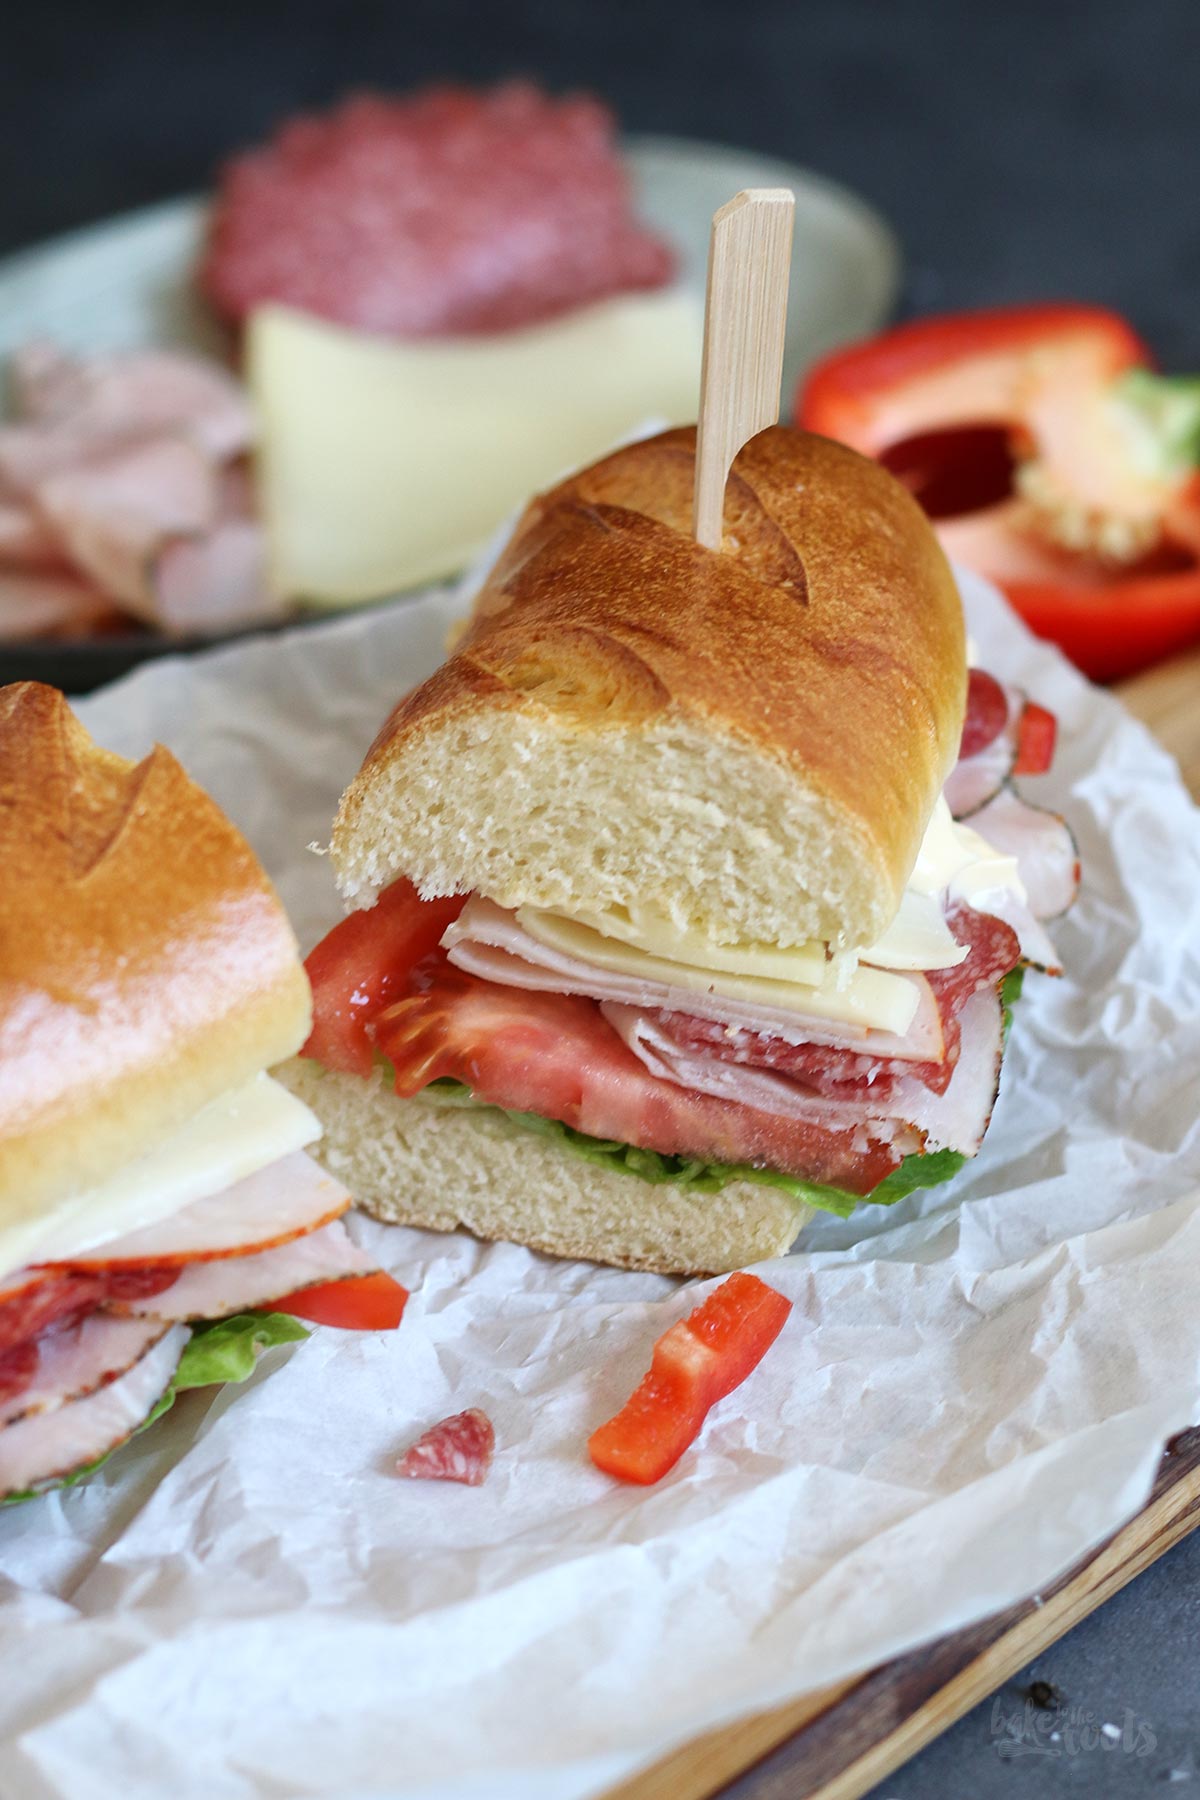 Italian B.M.T. Sandwiches | Bake to the roots